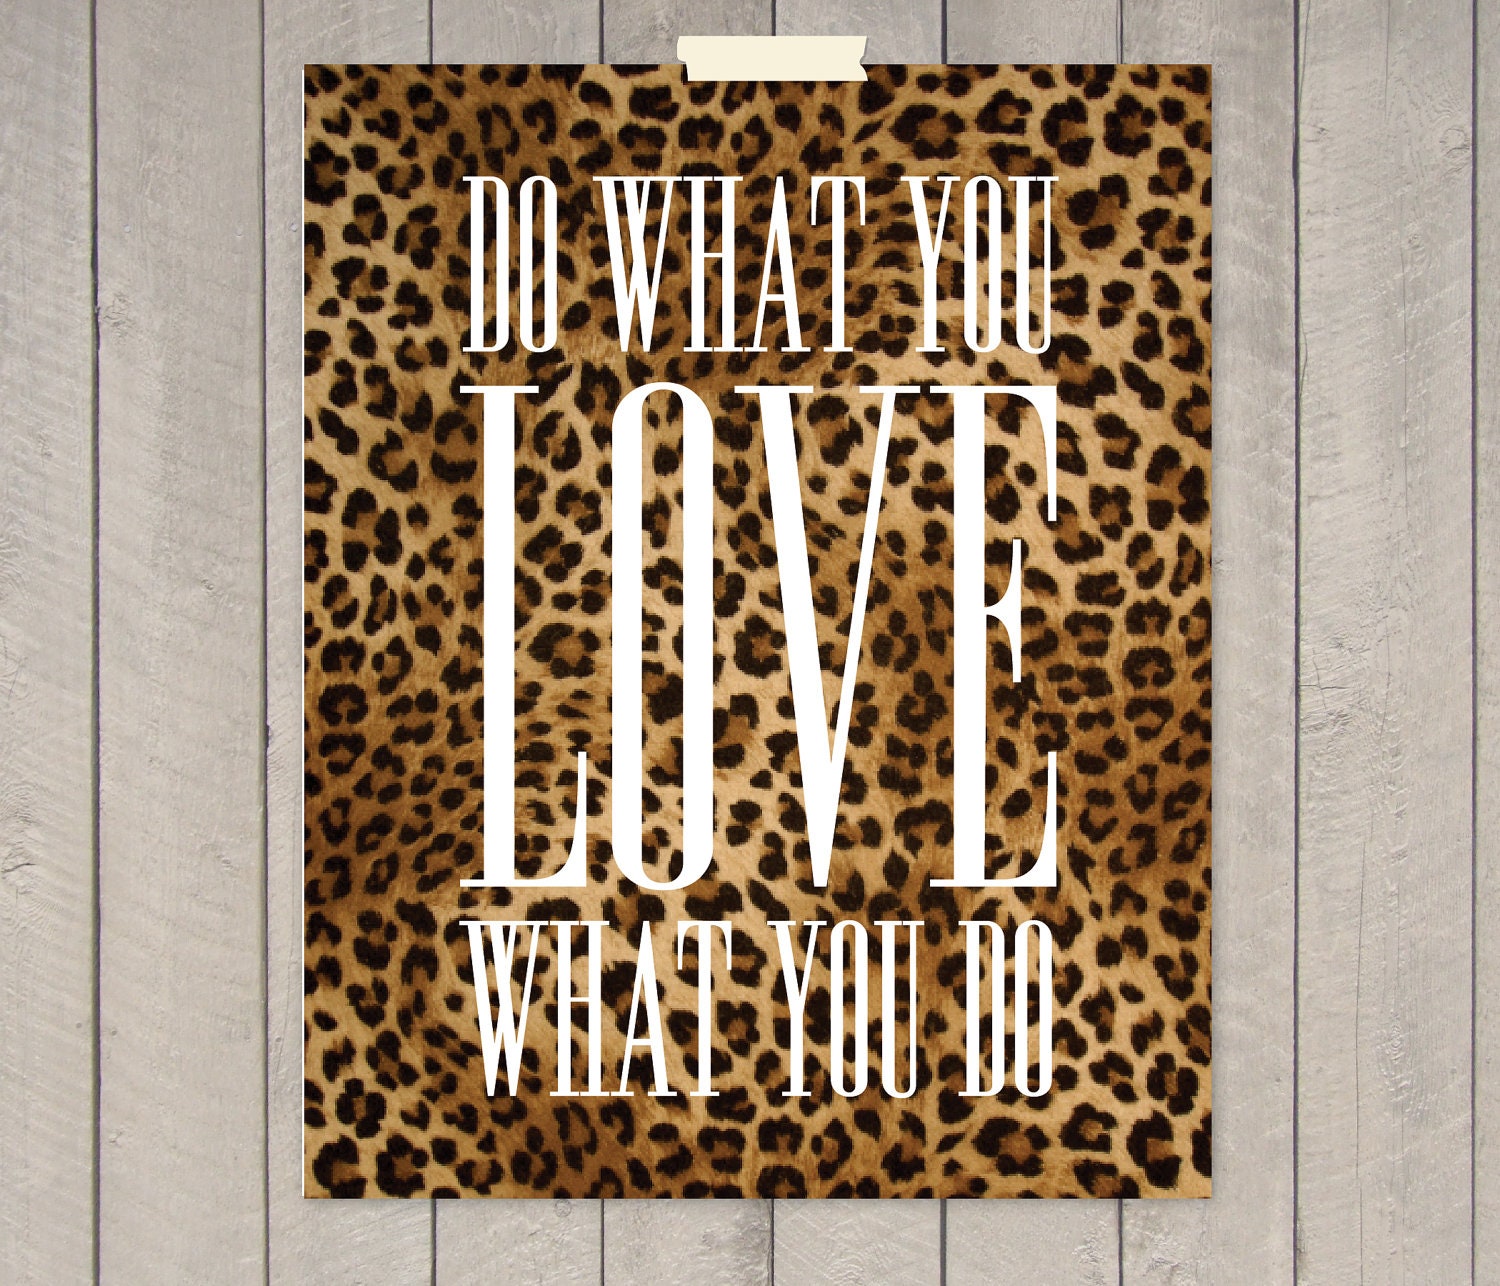 Do what you LOVE, what you do - 8 x 10" Print